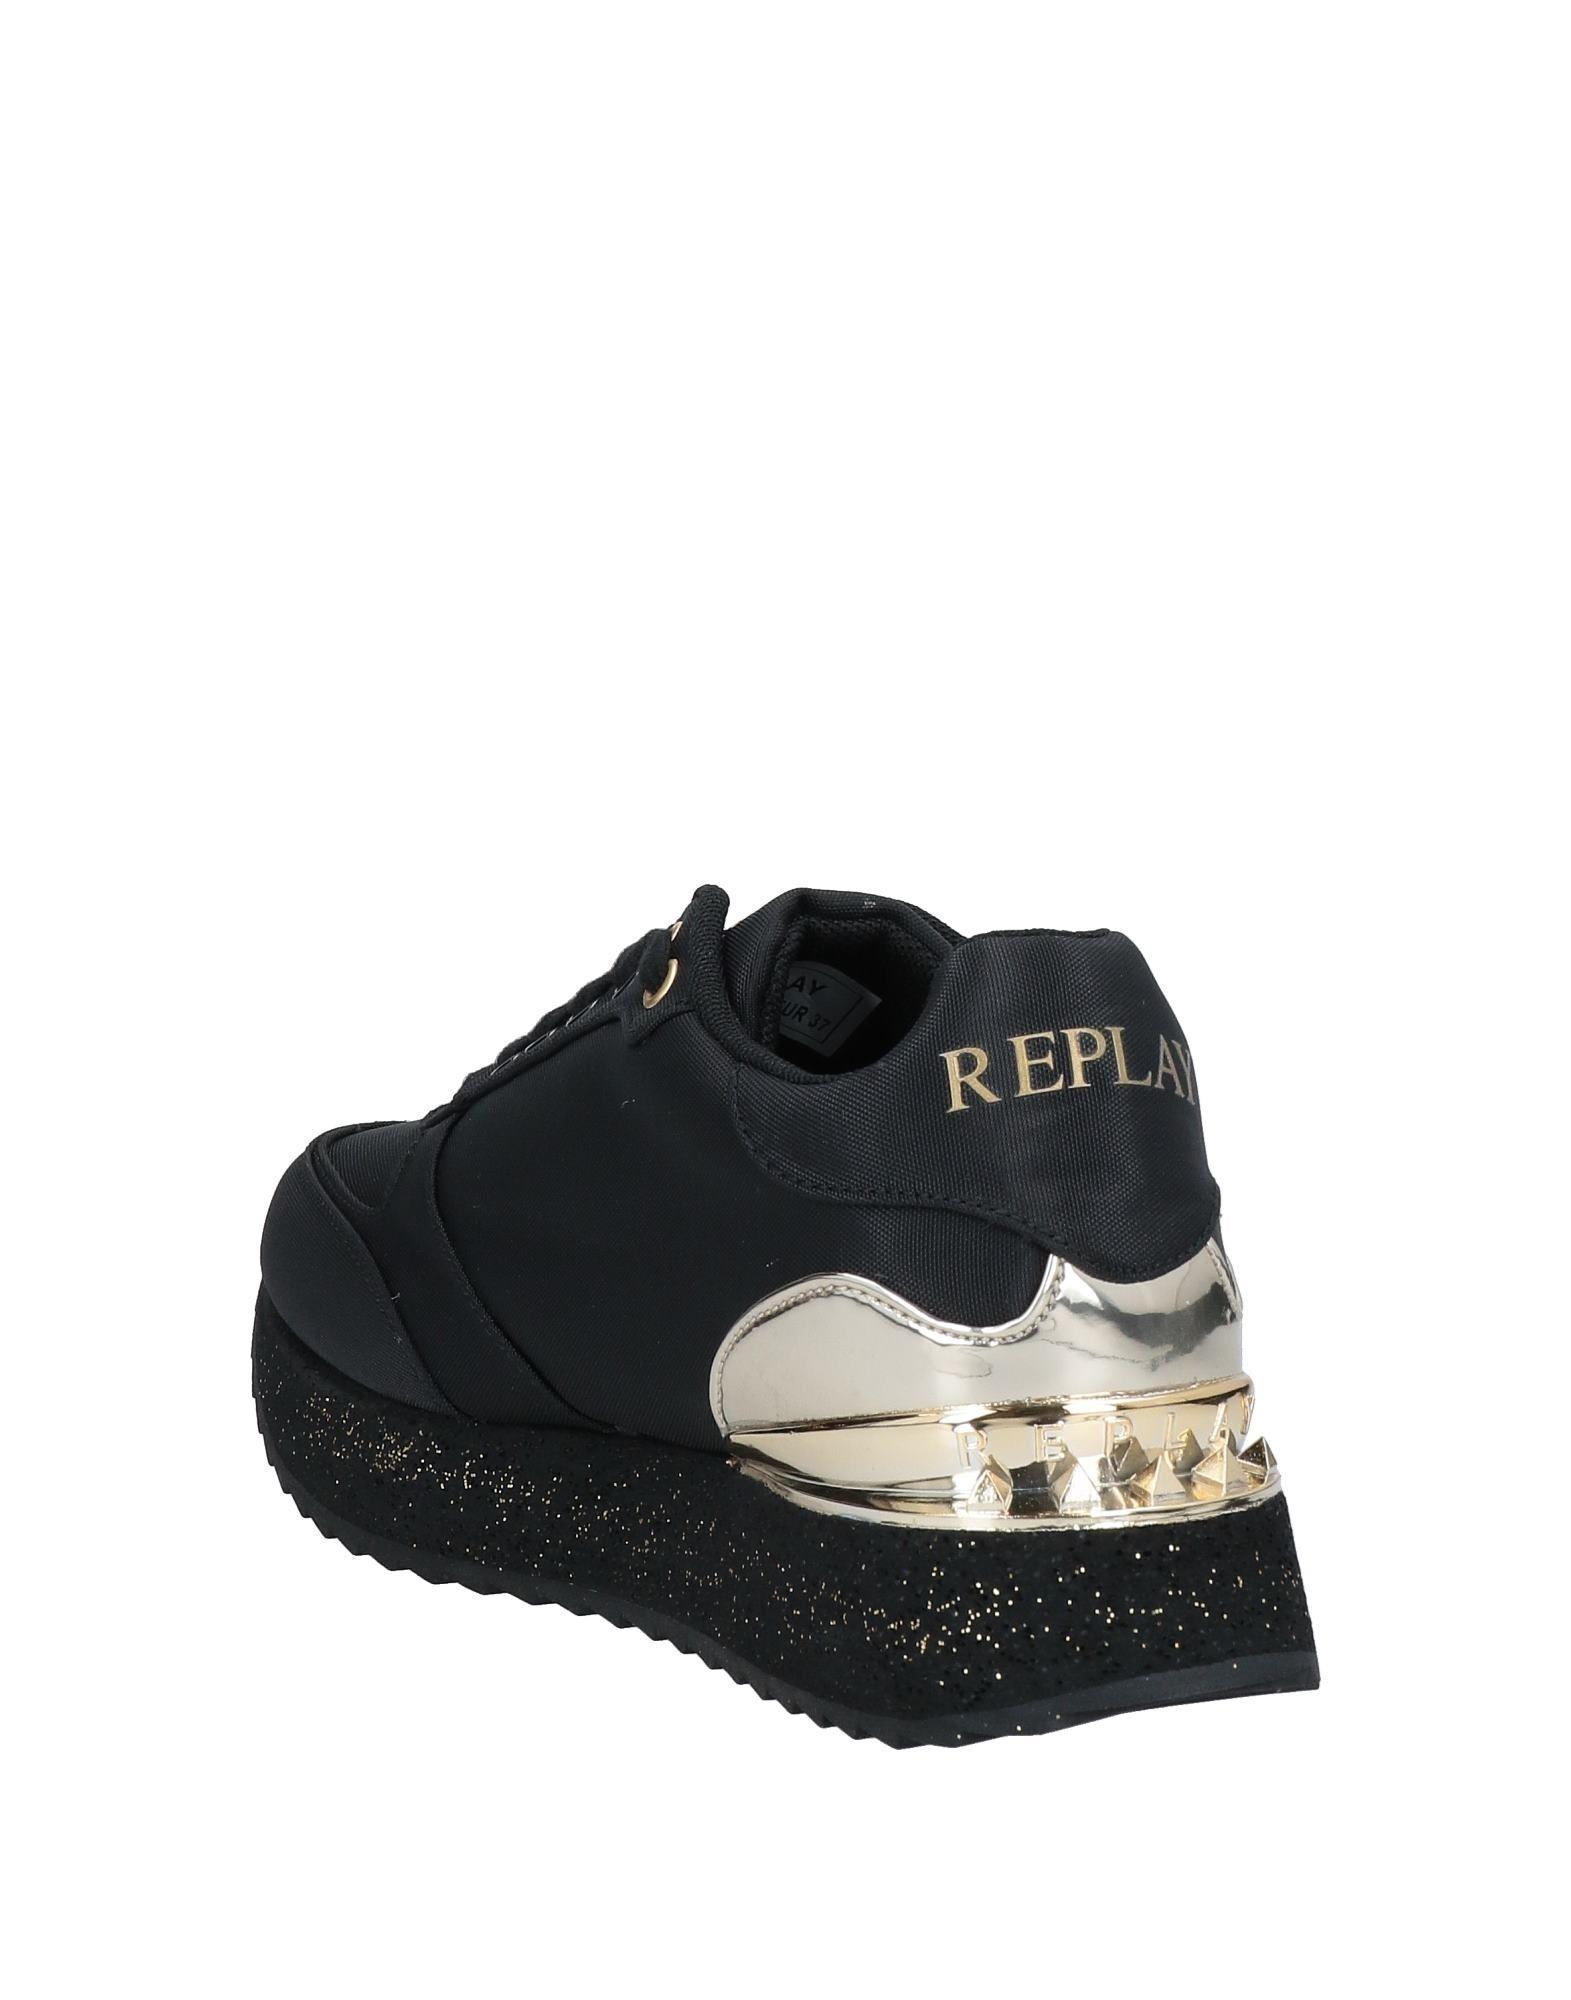 replay sneakers Off 69% - torquegroup.co.in